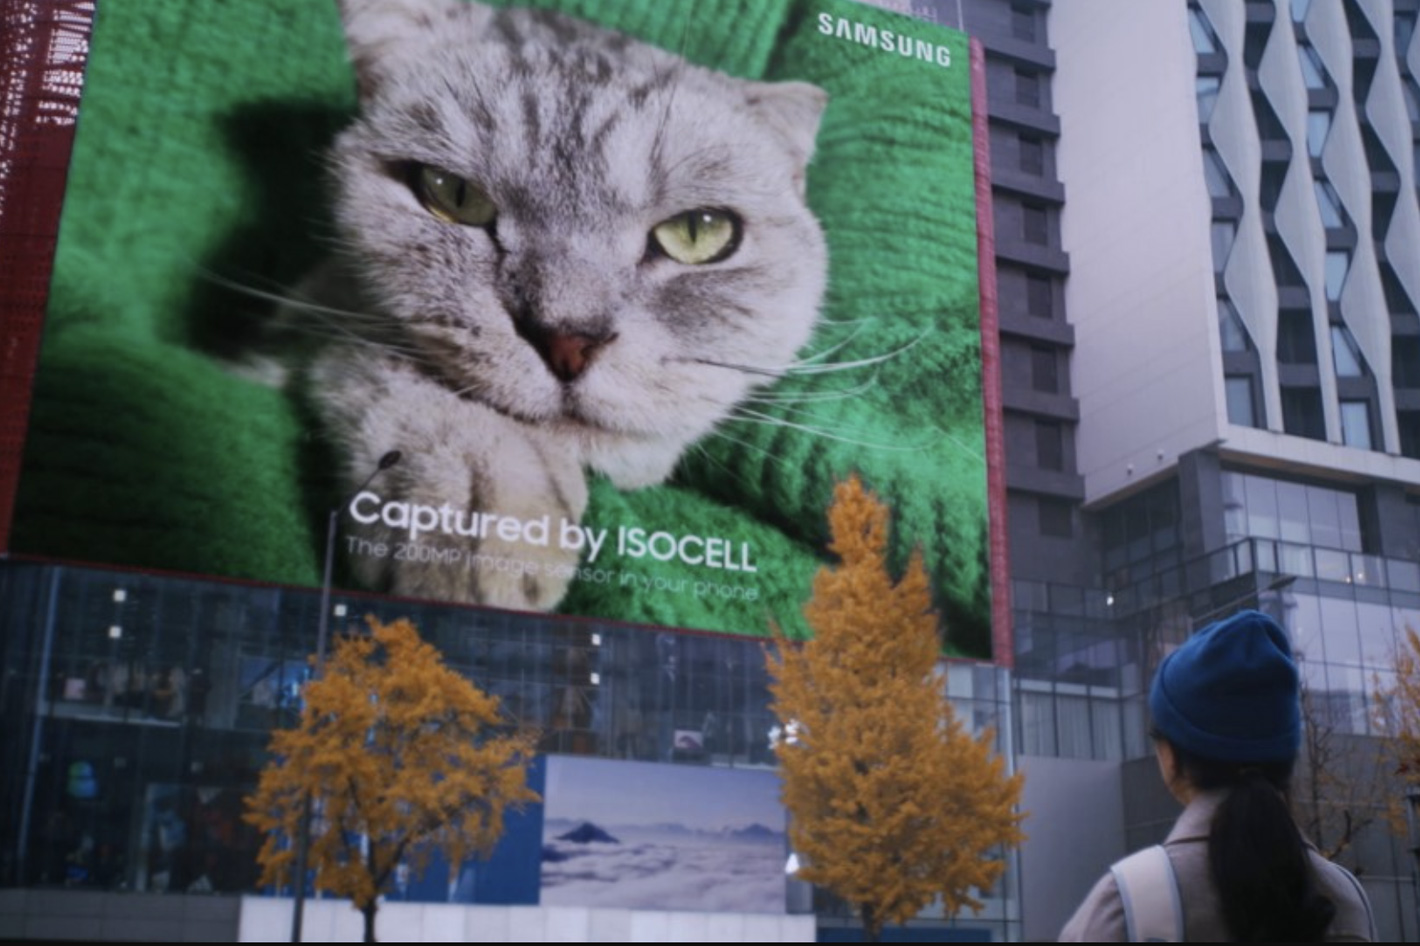 A 200MP cat to promote Samsung’s ISOCELL image sensor